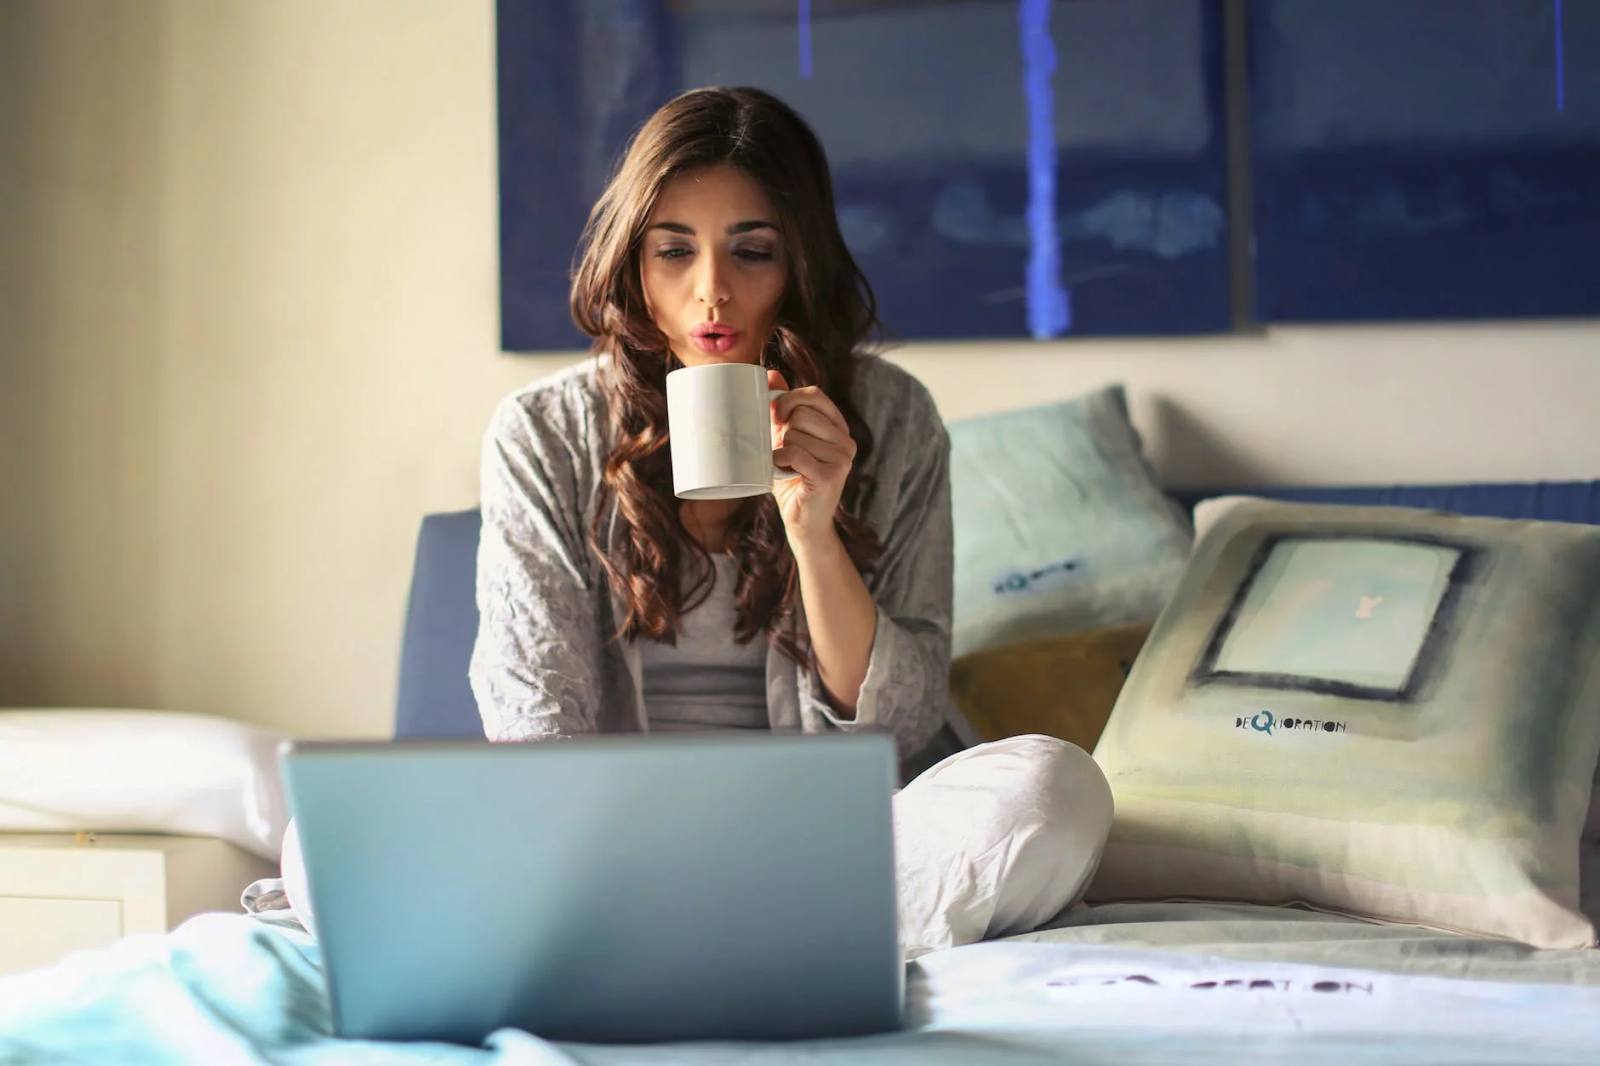 If you're working from home, here are some tips to get you focused, productive, and organized so you can keep your daily schedule and reituals together.